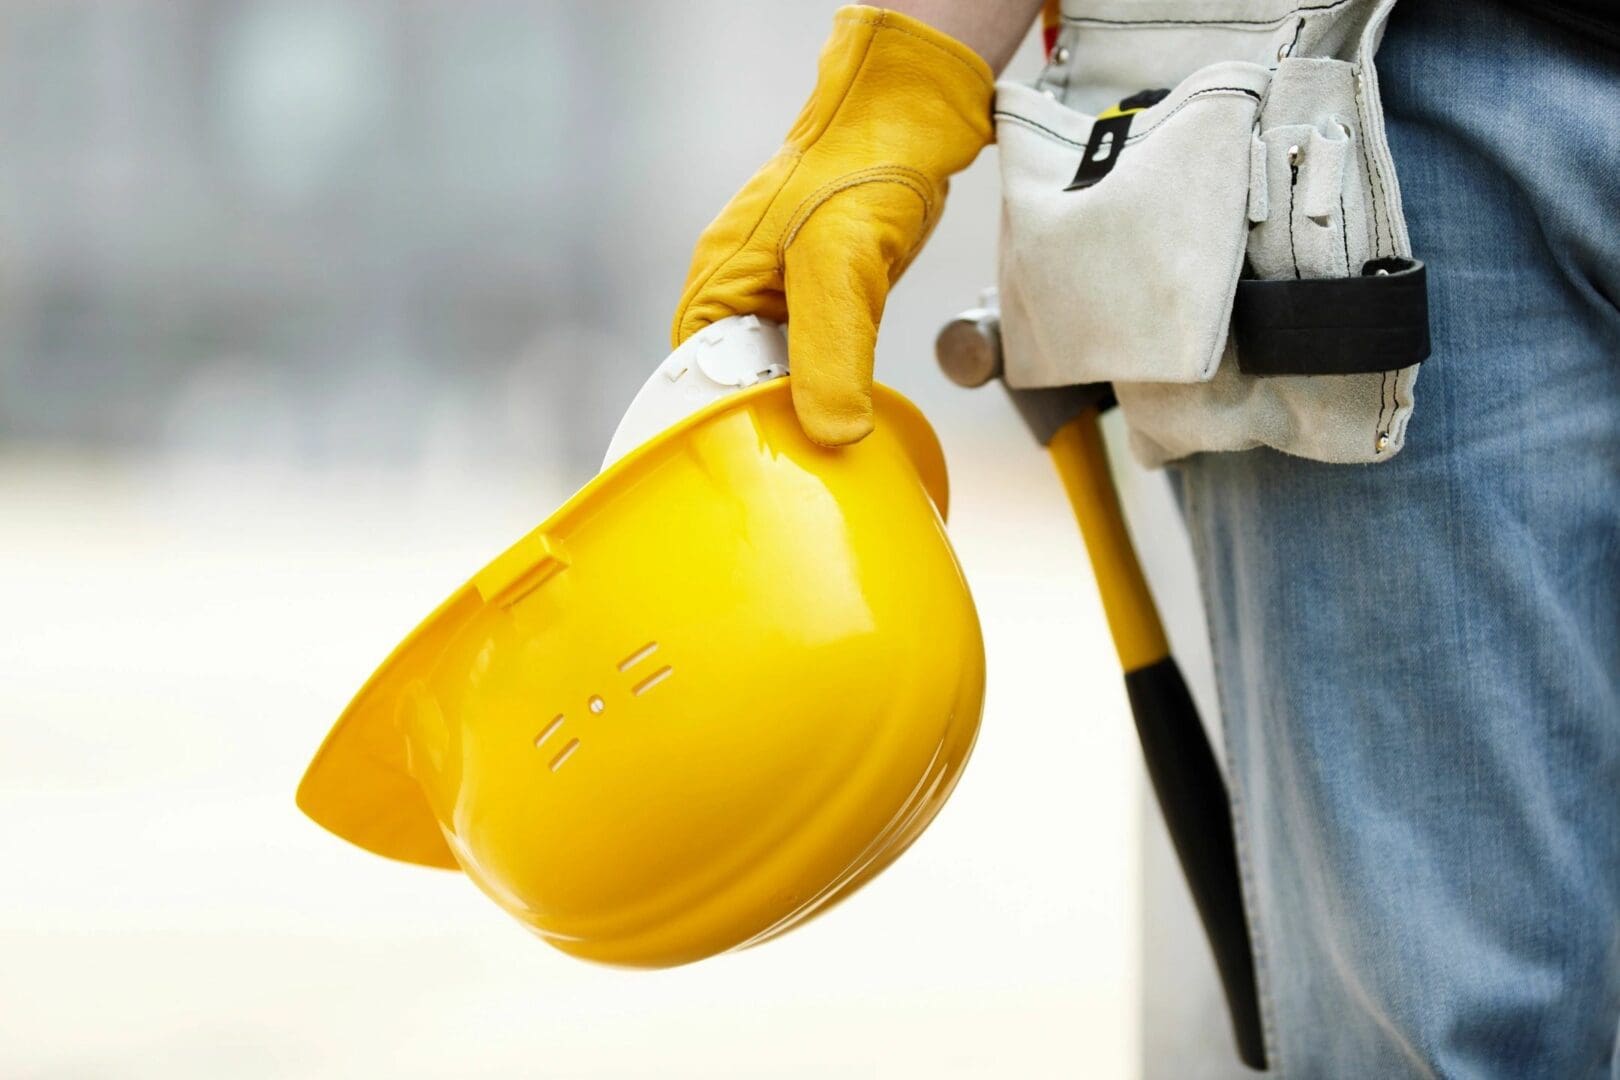 A person holding a yellow hard hat and wearing gloves.